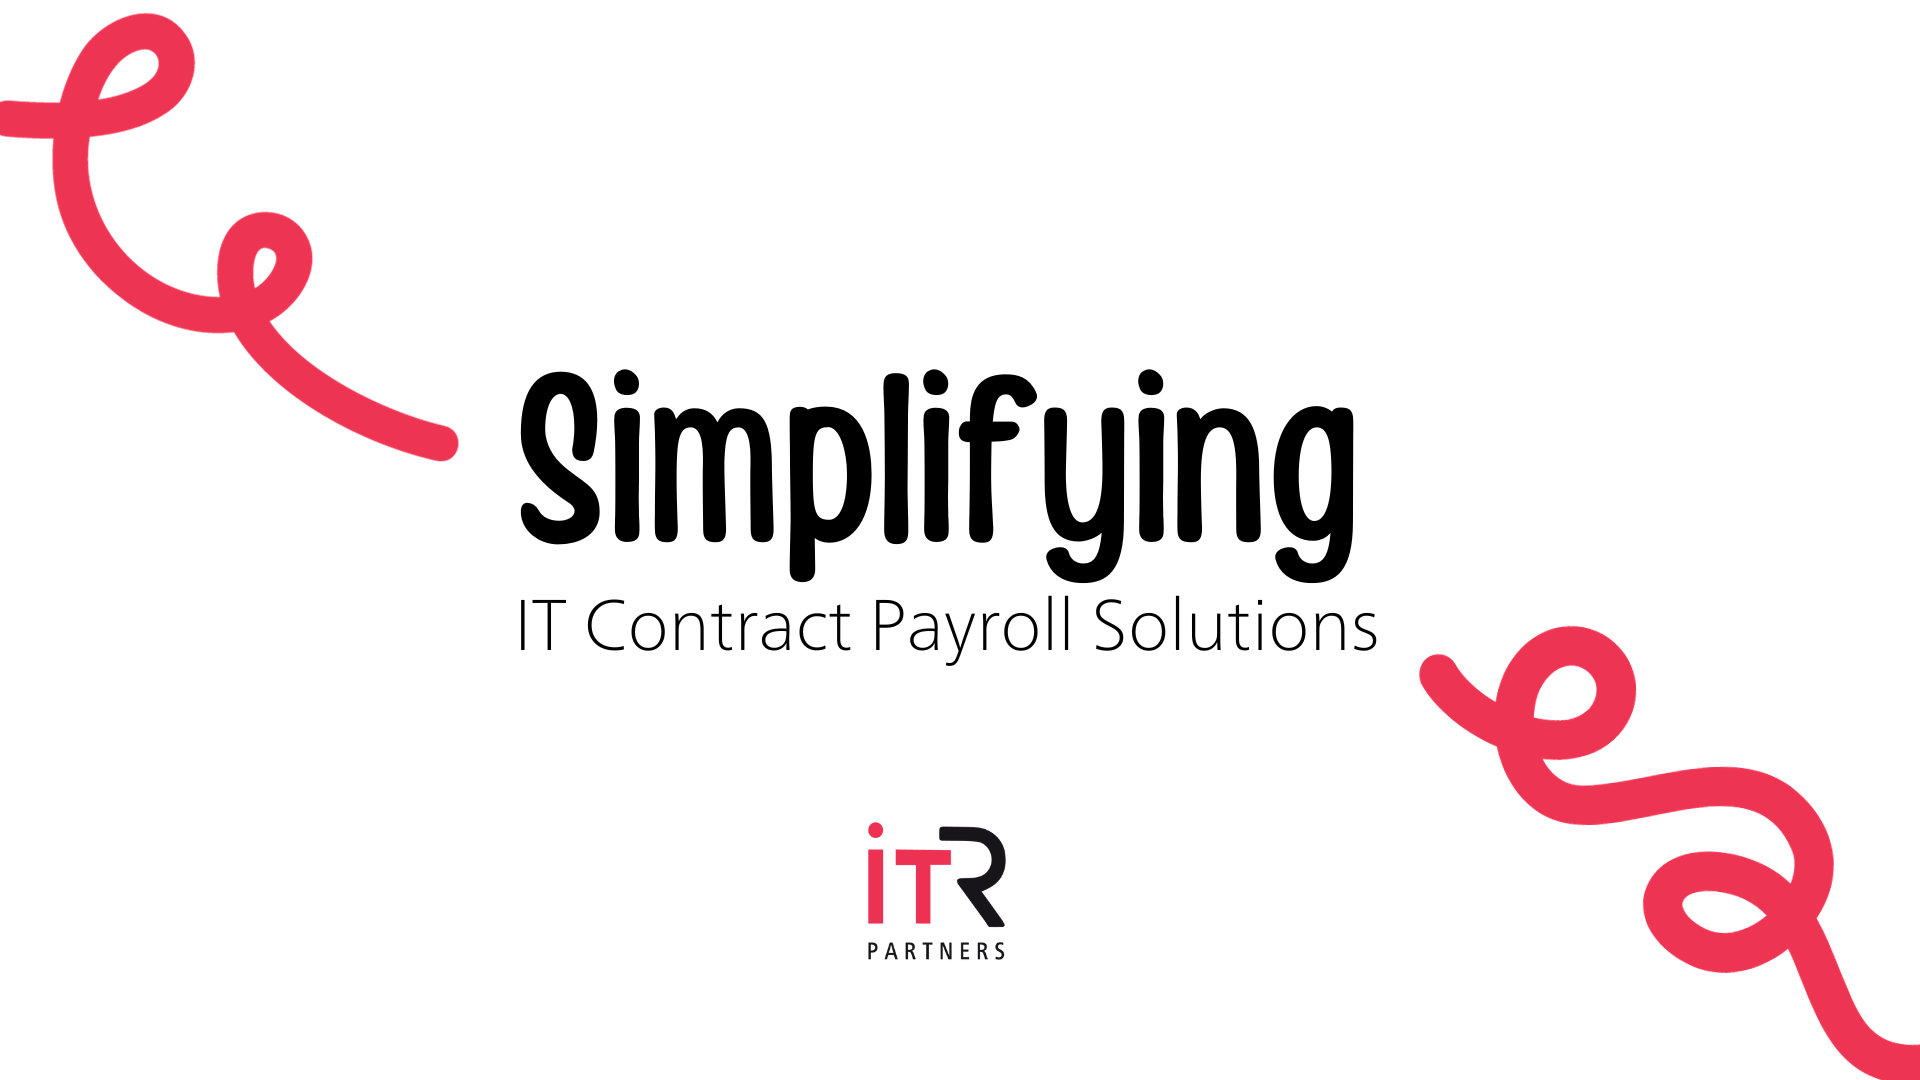 Simplifying IT contract payroll solutions